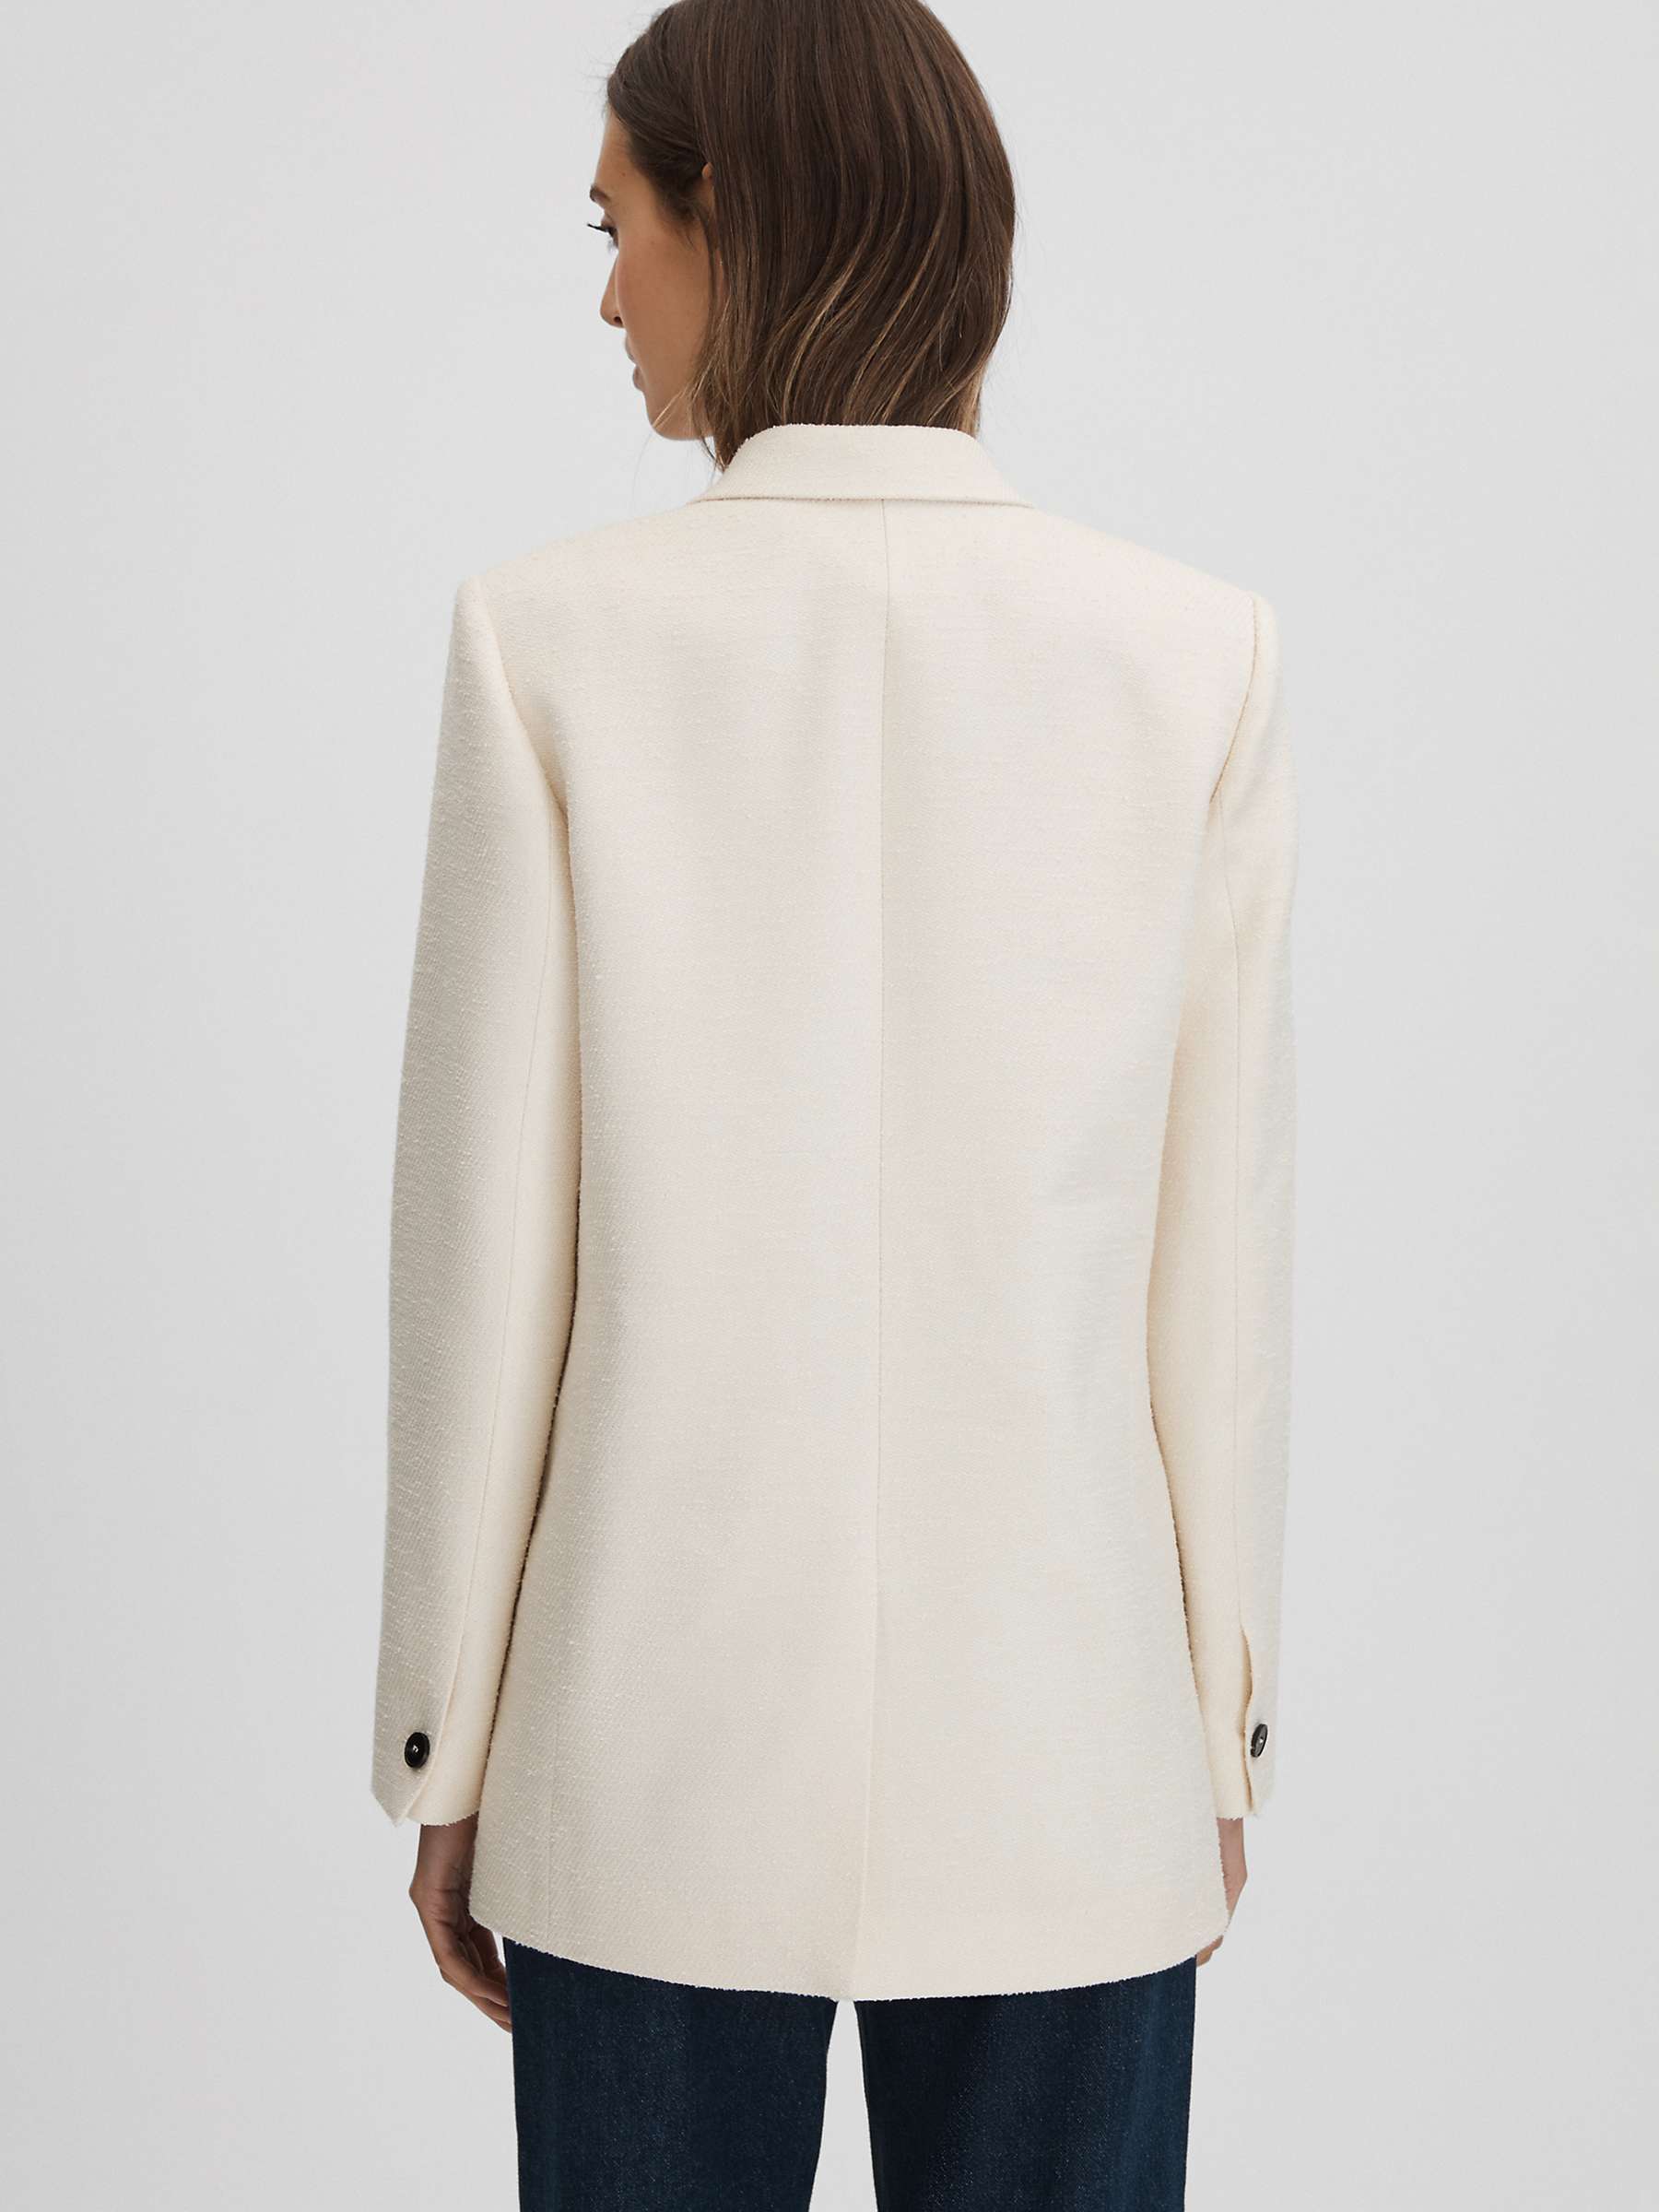 Buy Reiss Bronte Double Breasted Blazer, White Online at johnlewis.com